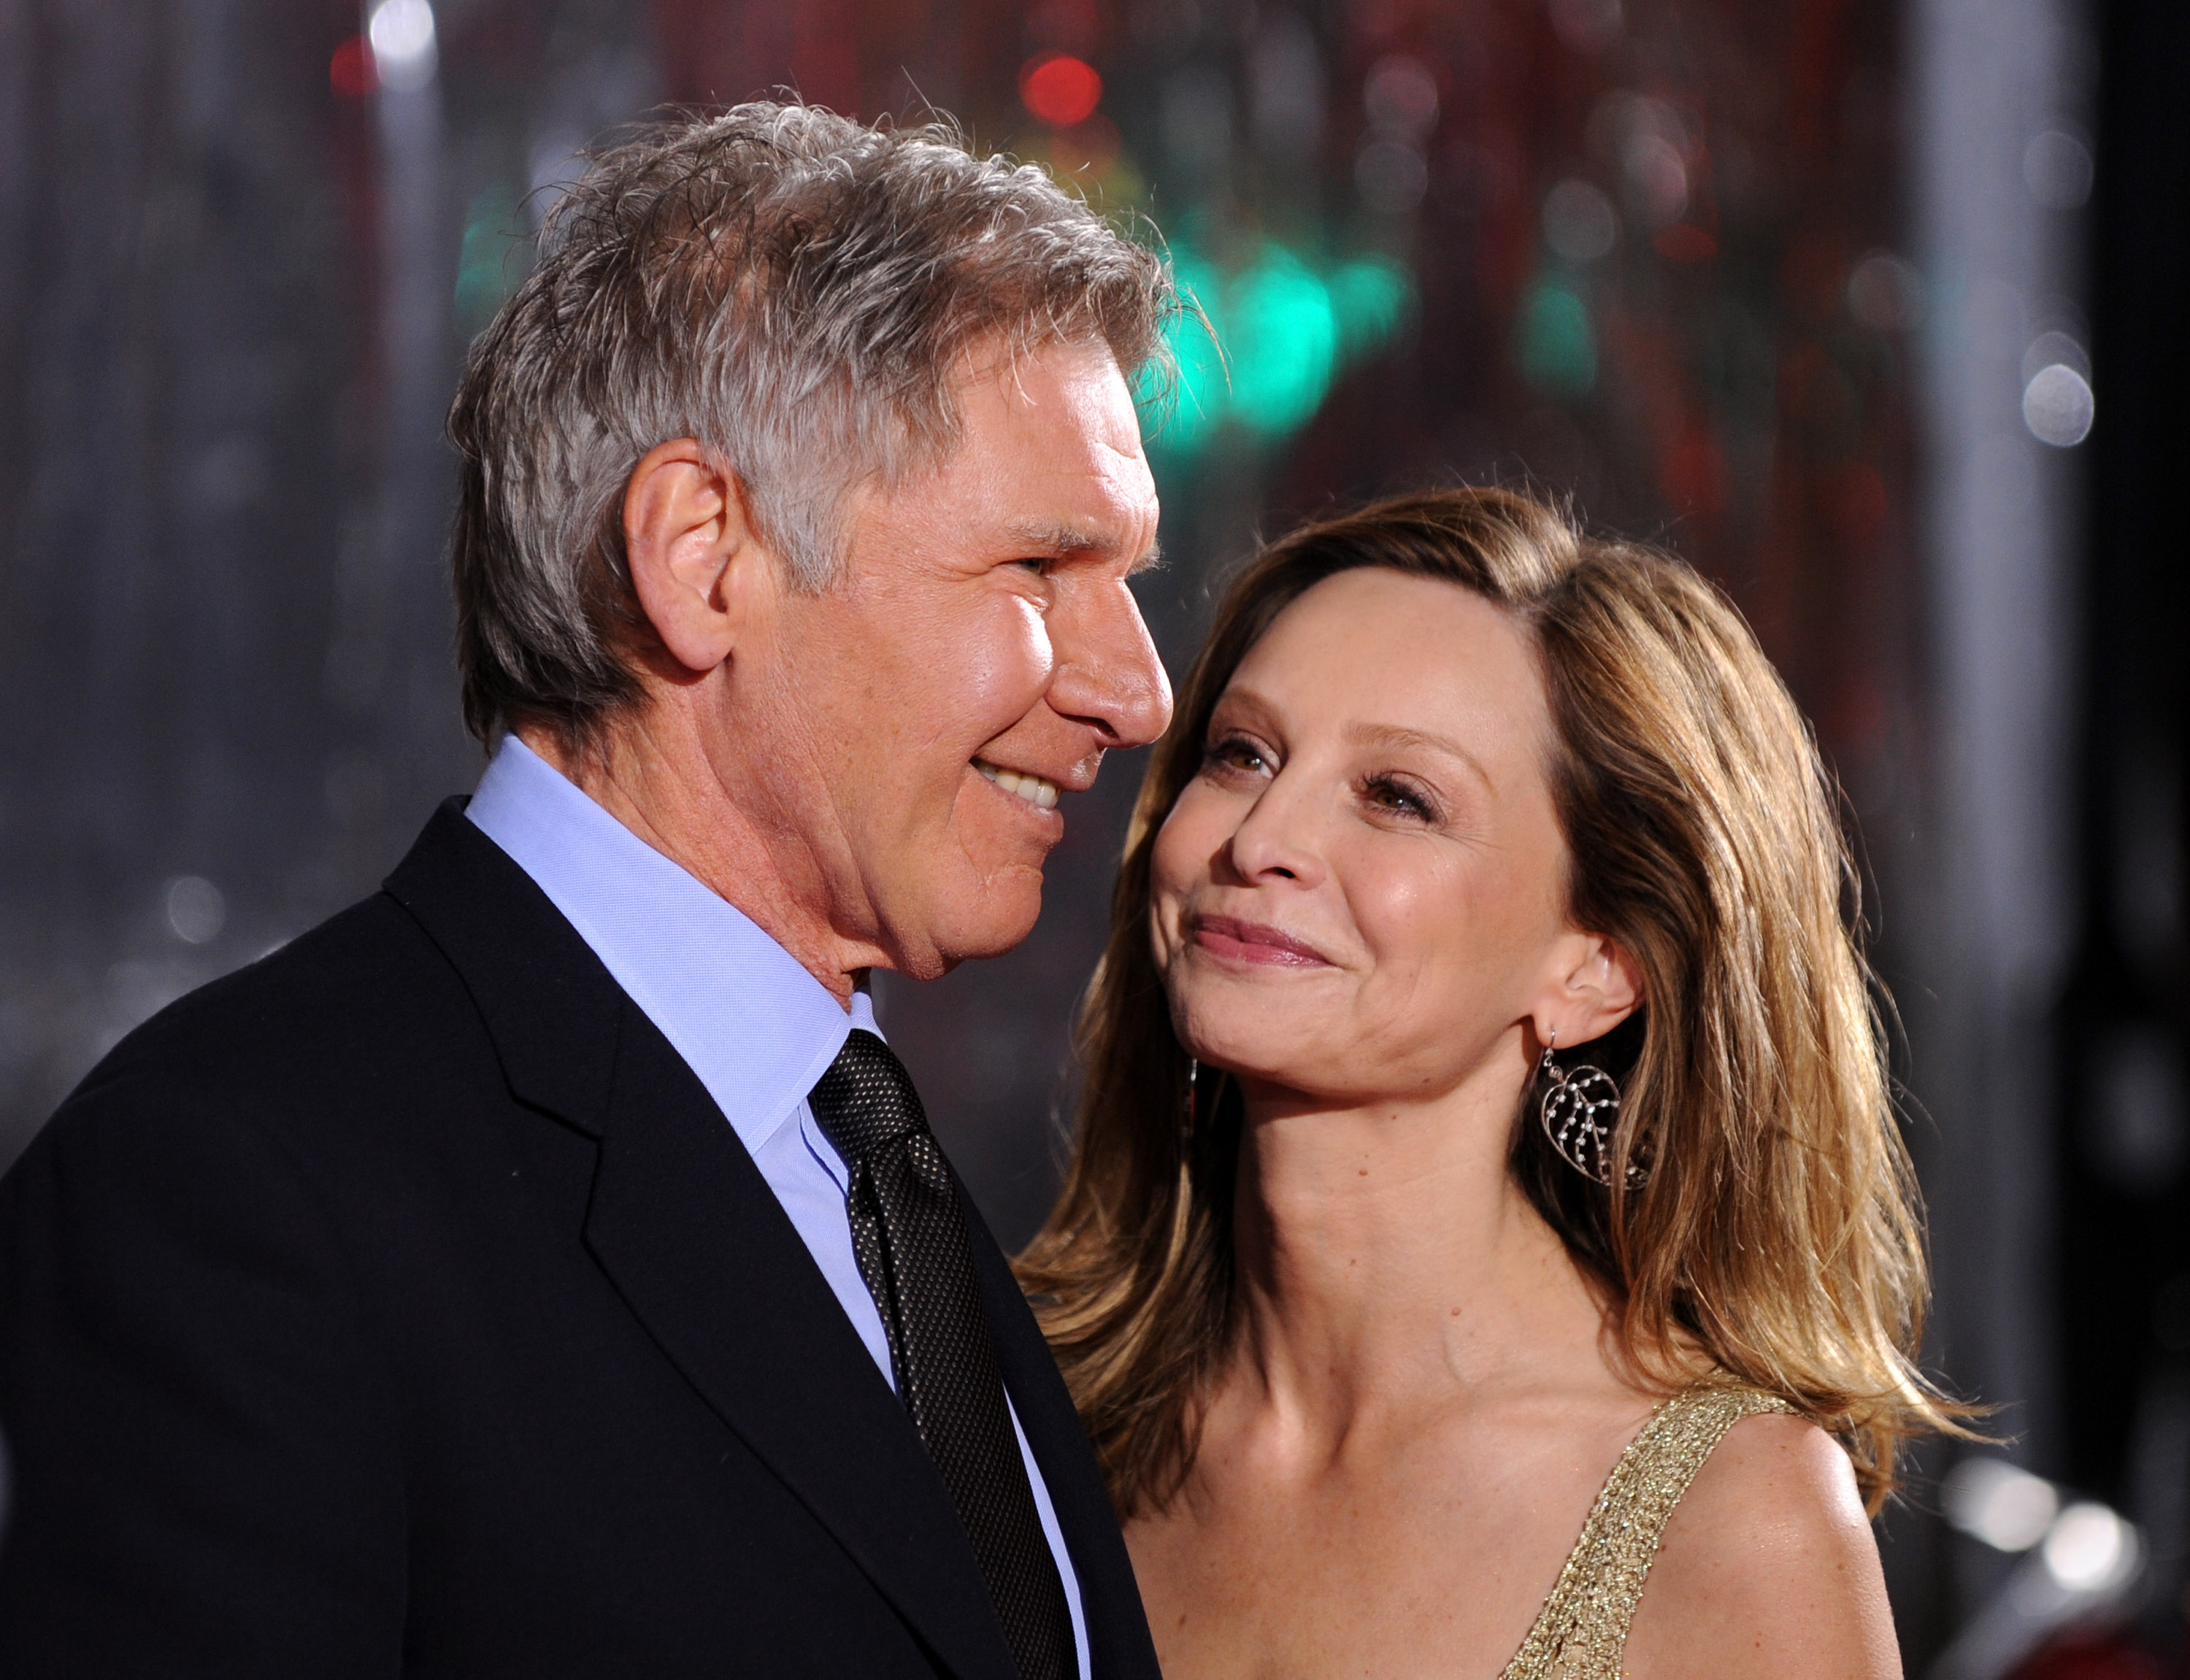 Harrison Ford and Calista Flockhart on January 19, 2010 in Hollywood, California | Source: Getty Images